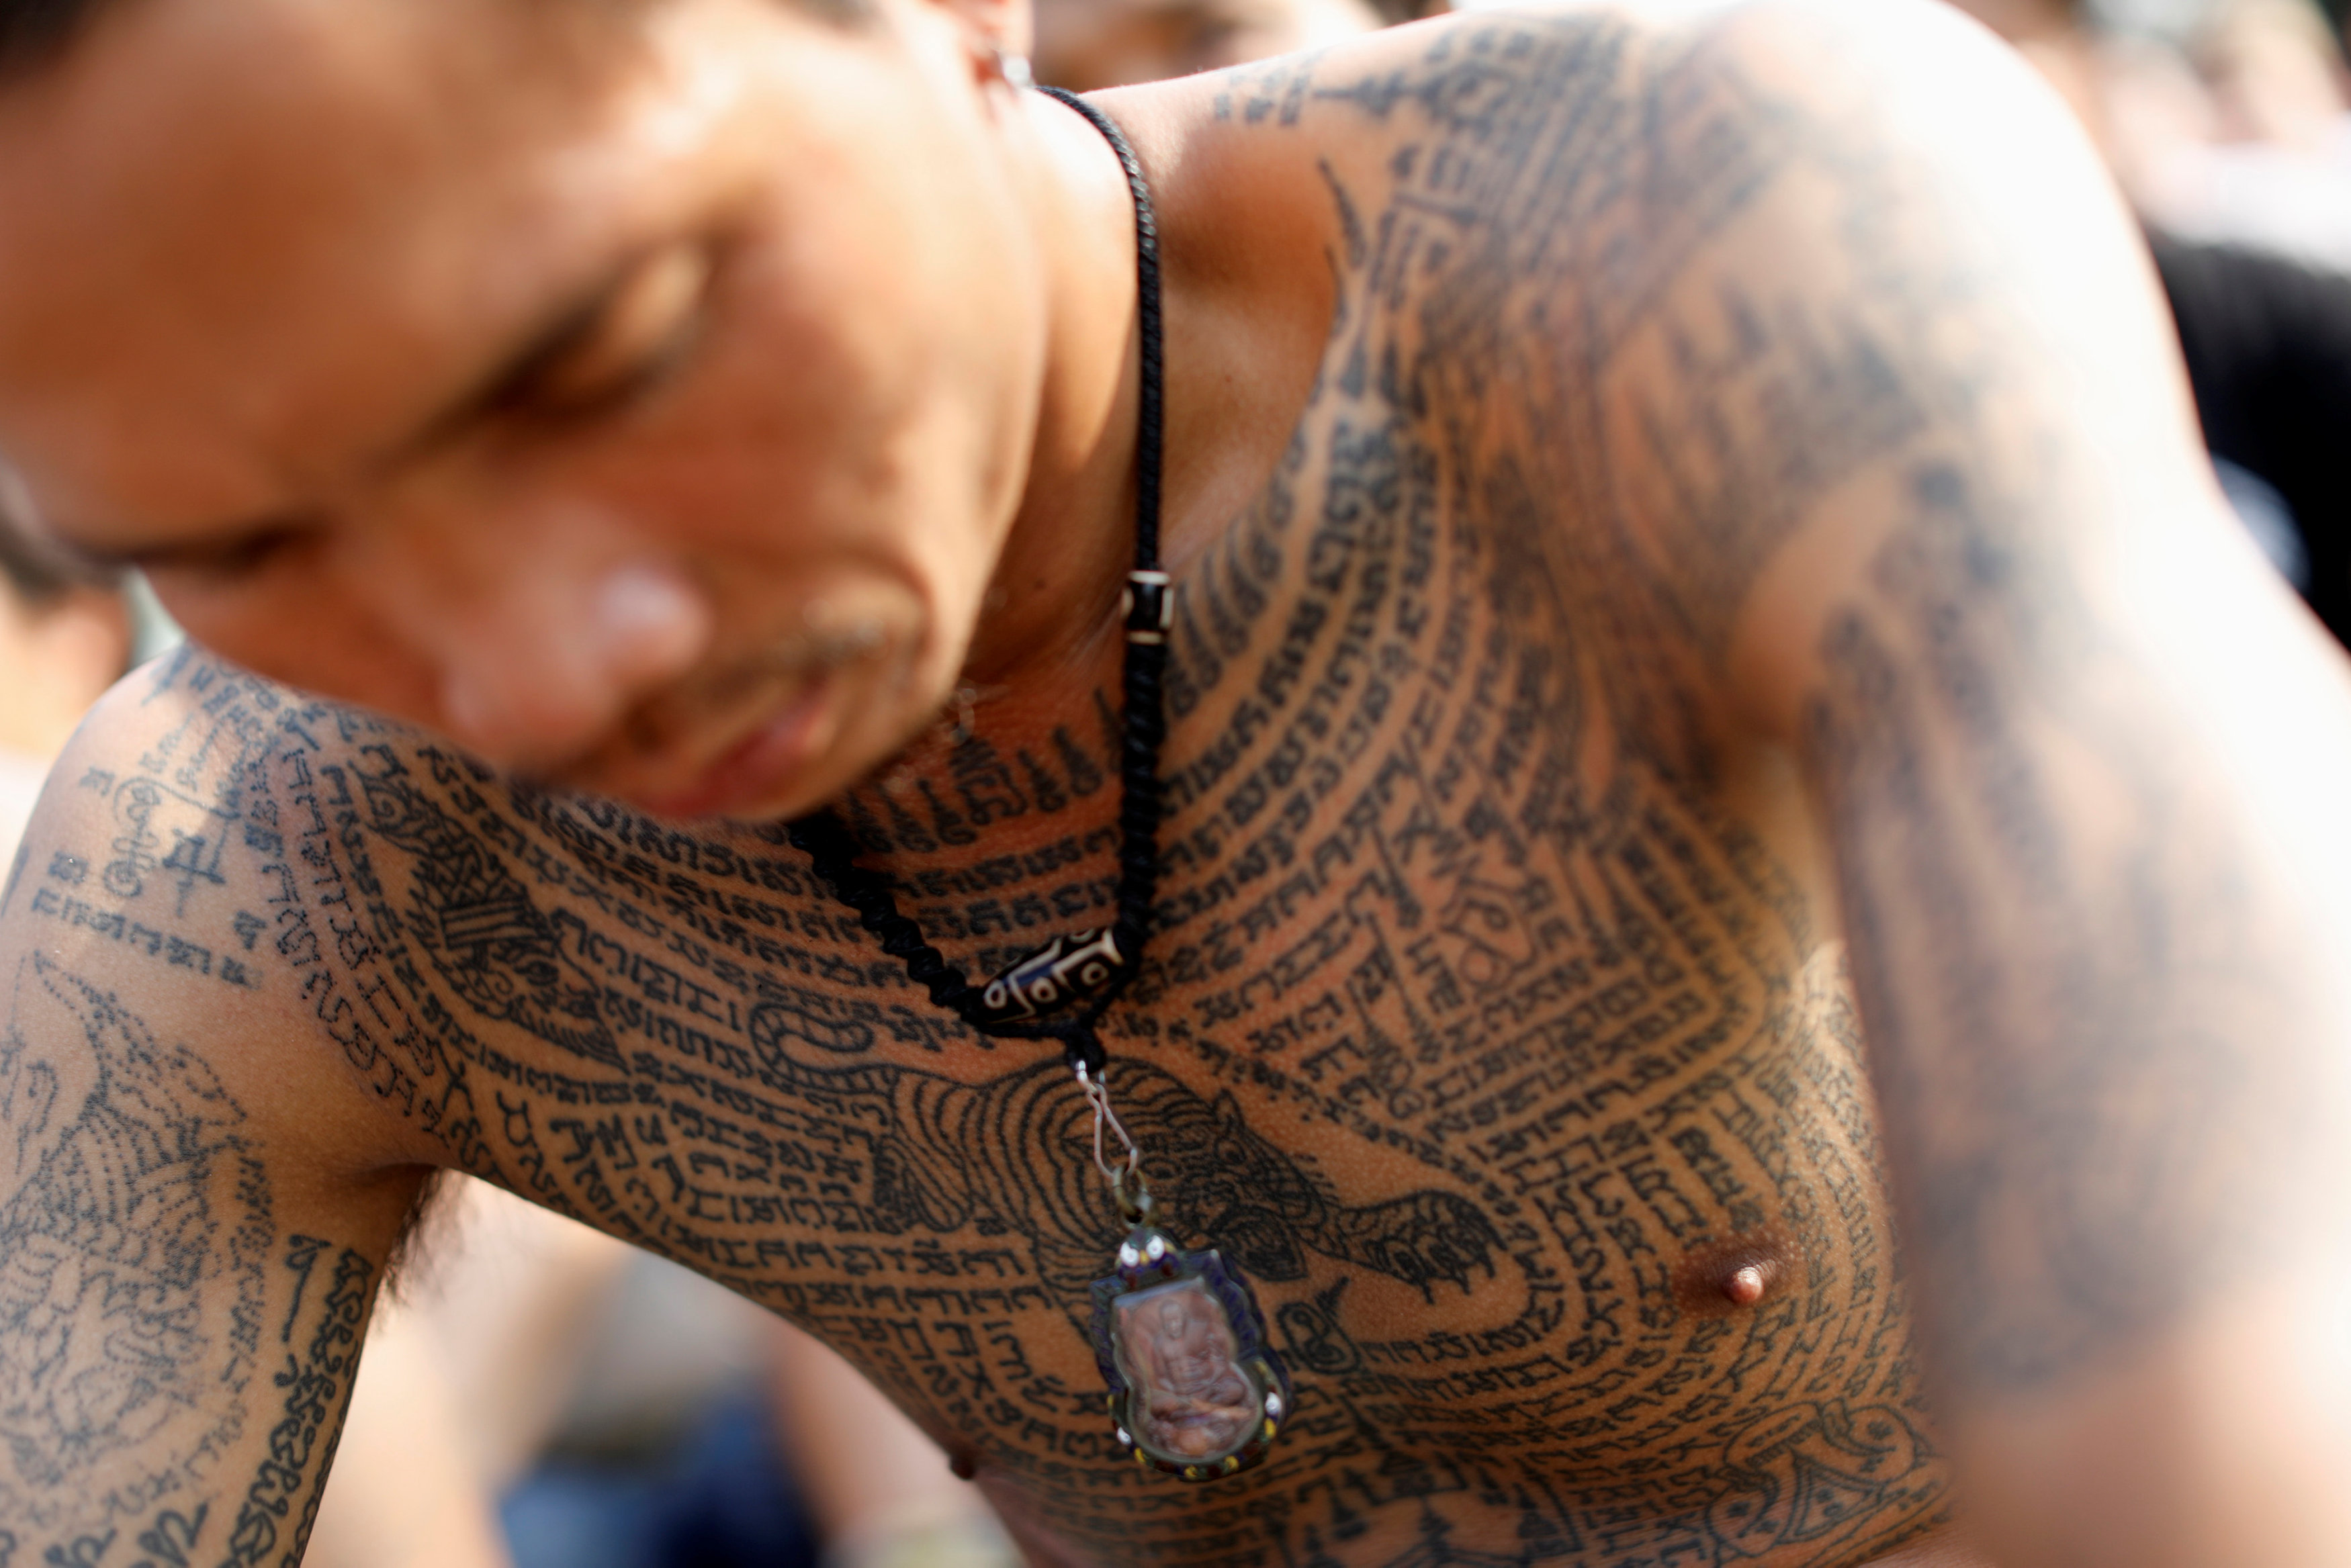 A devotee attends the religious tattoo festival at Wat Bang Phra, where they come to recharge the power of their sacred tattoos, in Nakhon Pathom province, Thailand, March 11, 2017. REUTERS/Jorge Silva